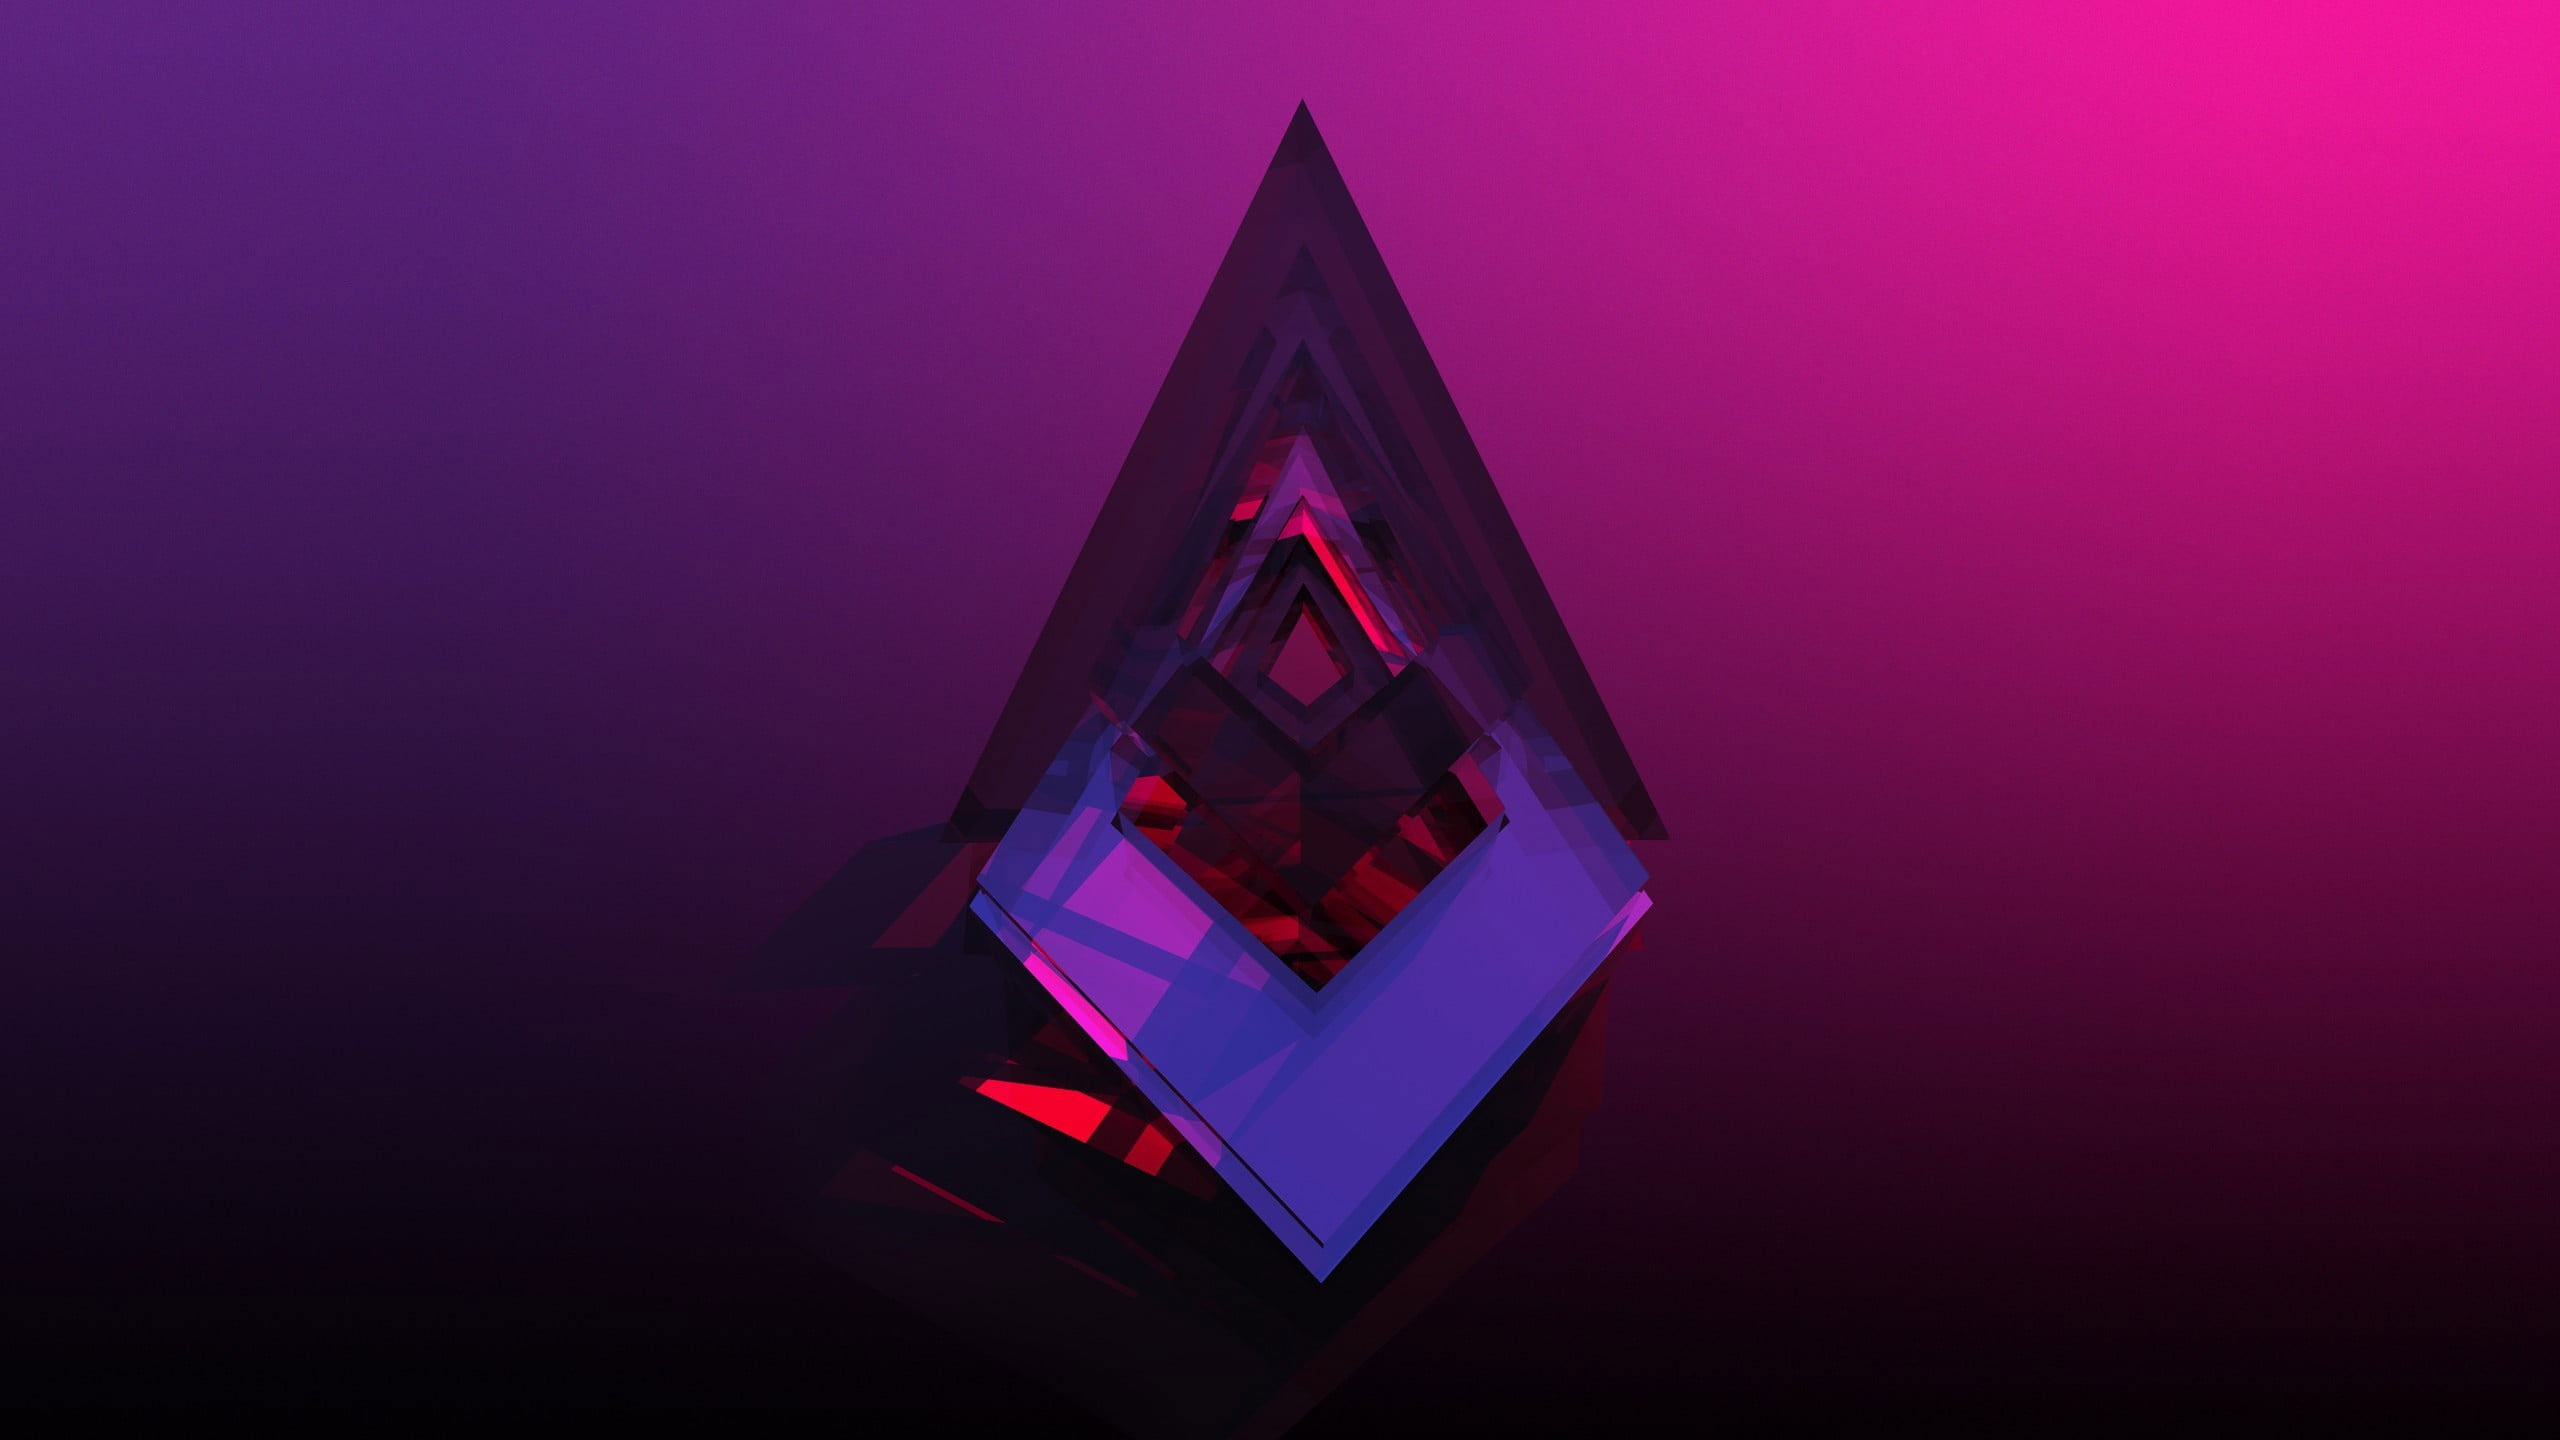 Purple and red gemstone wallpaper